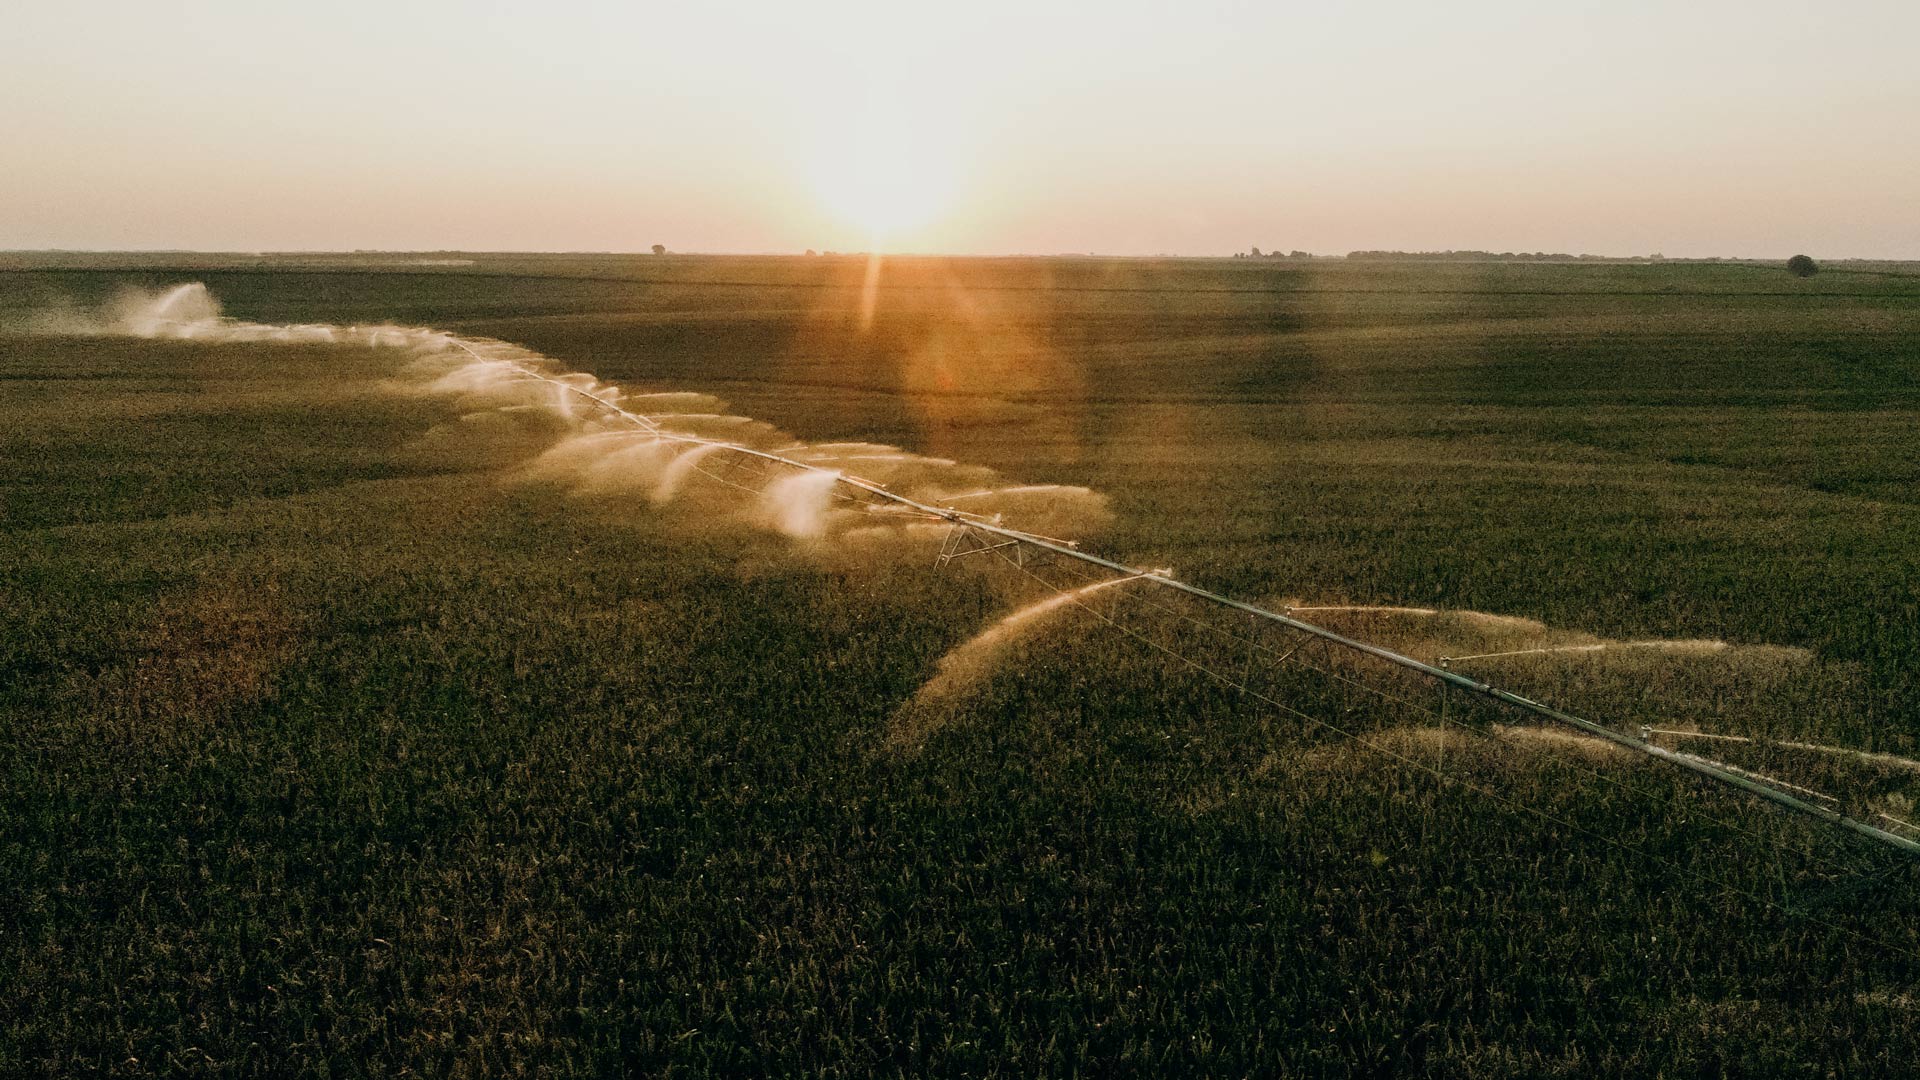 An irrigation system waters a cornfield.